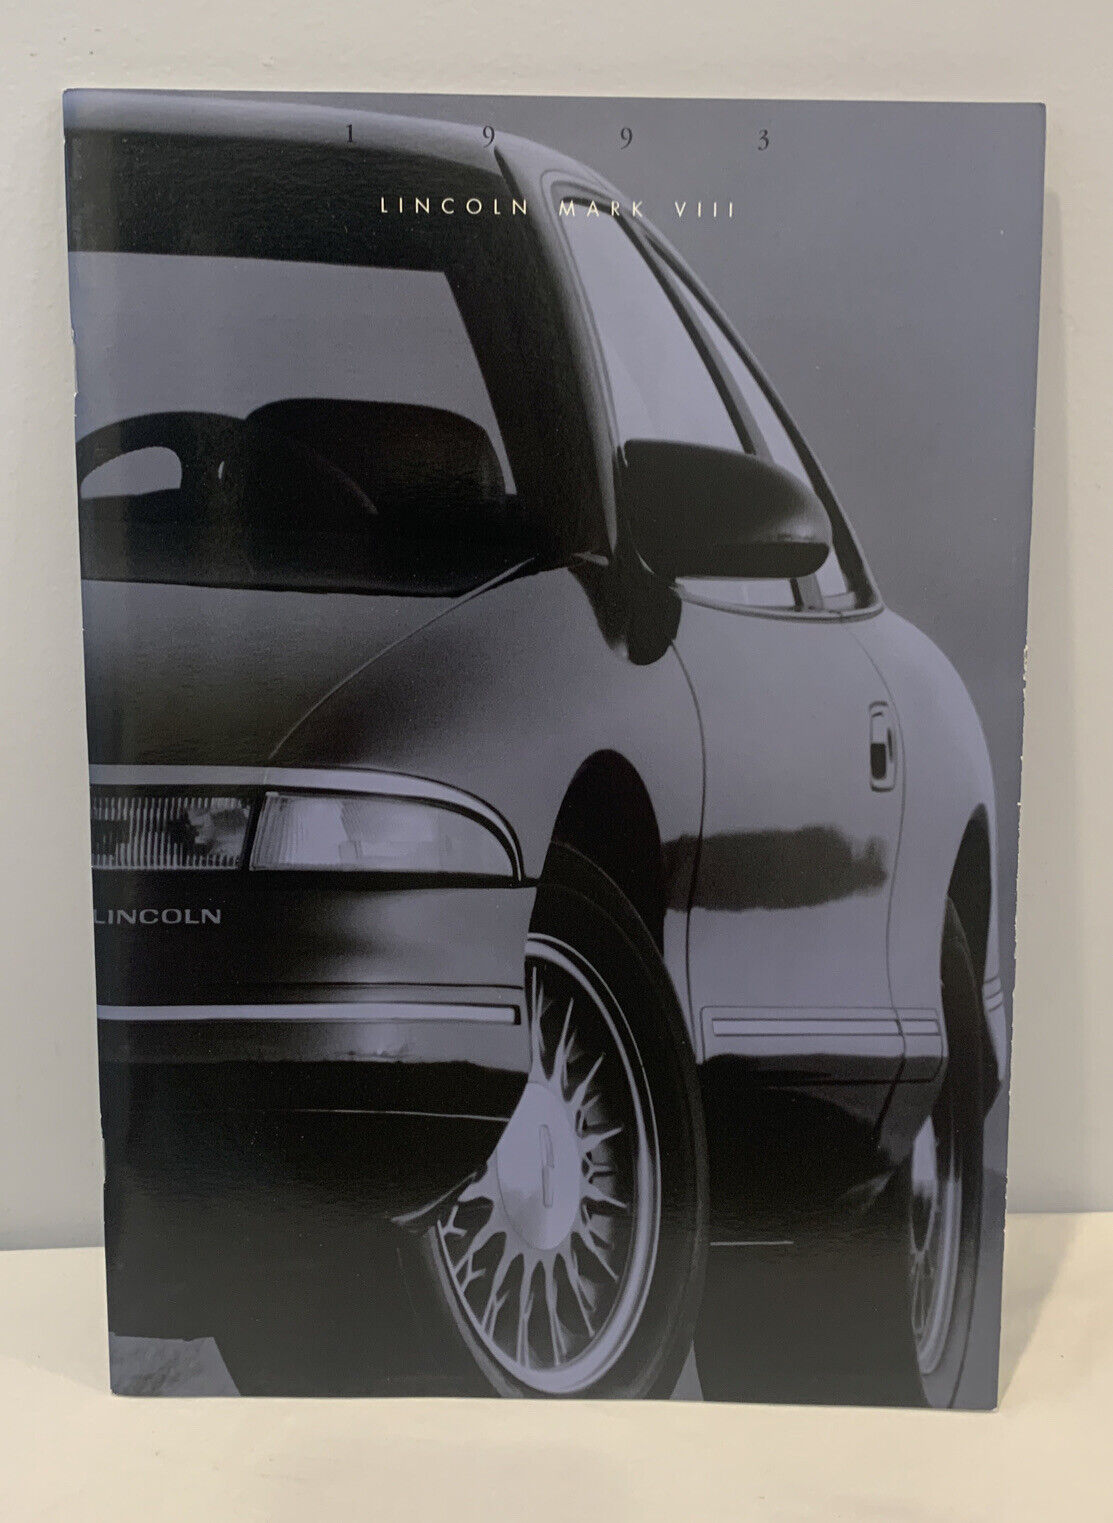 1993 Lincoln Mark VIII Brochure Dealer Issued Mint Condition Hard To Find Item